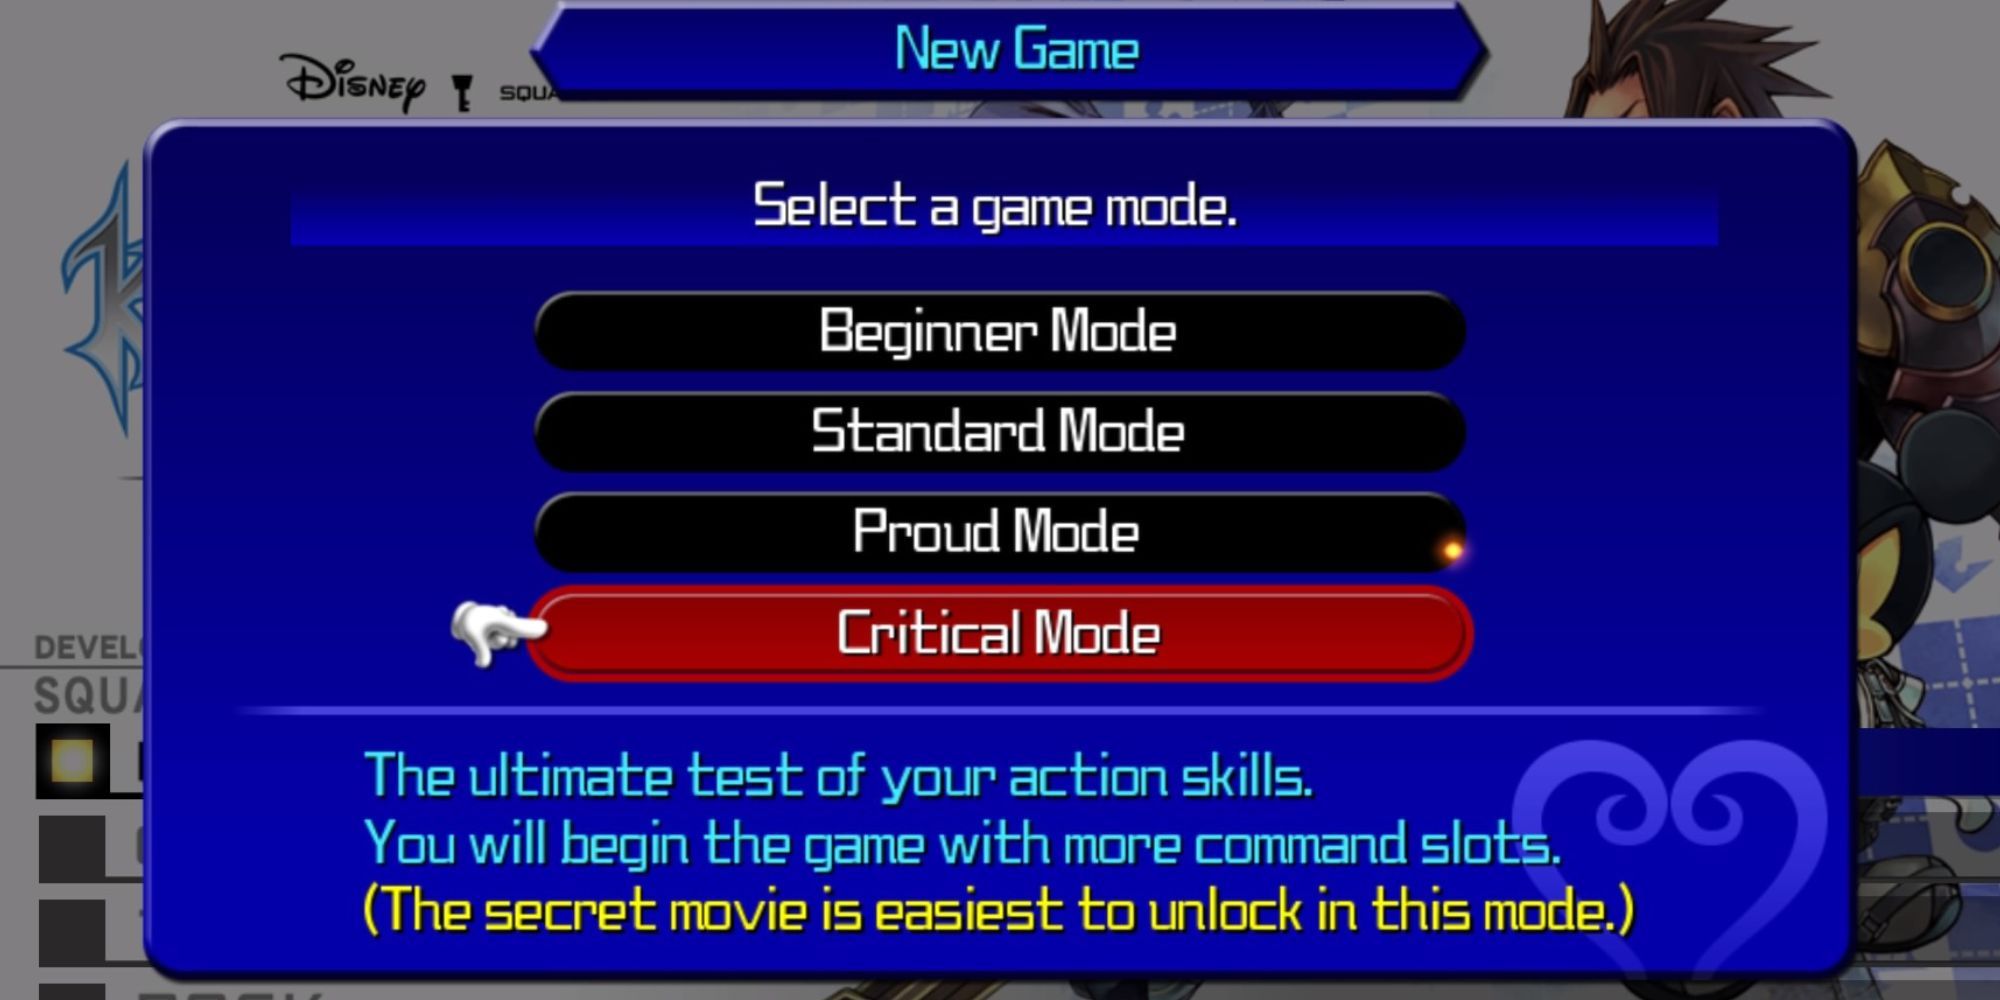 Selecting Critical Mode in KH BBS Final Mix.